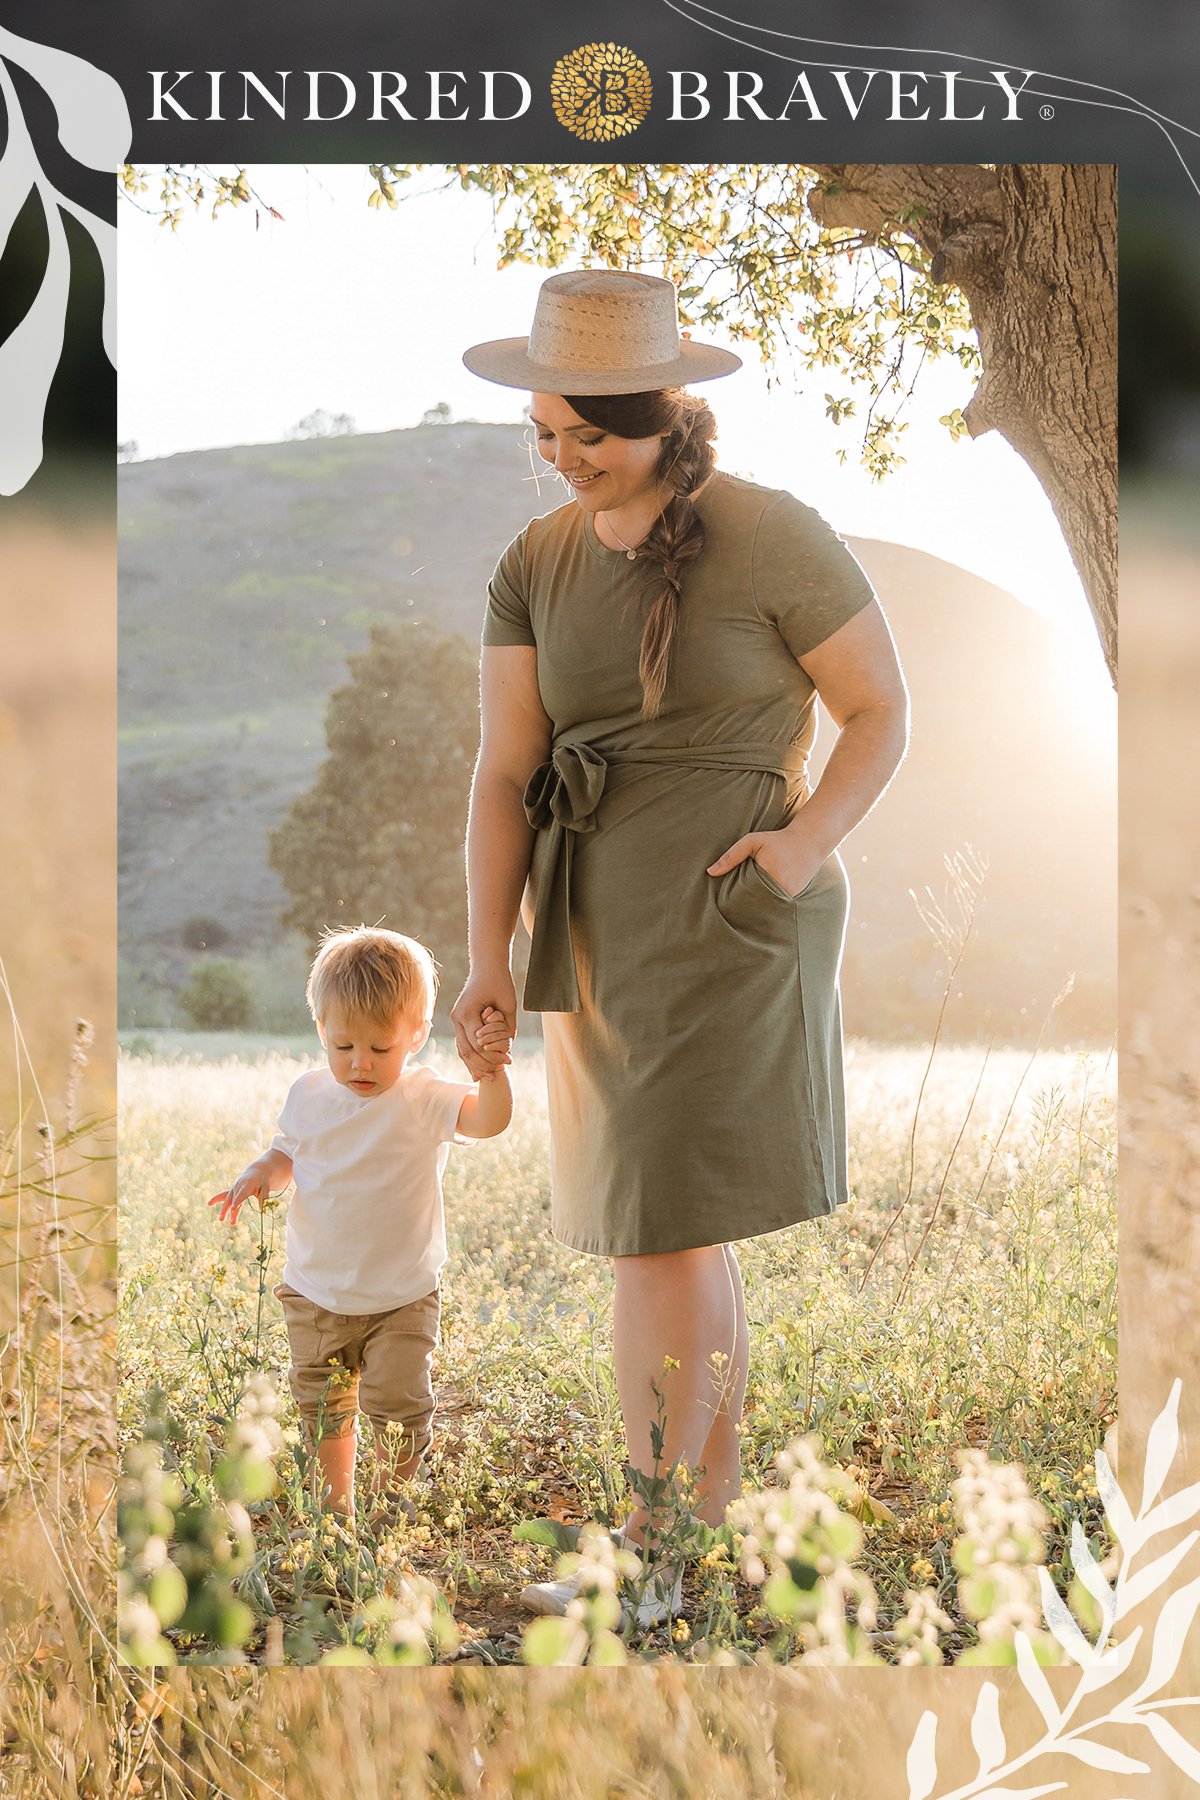 Kindred Bravely: Introducing: Your New Favorite Summer Dress!